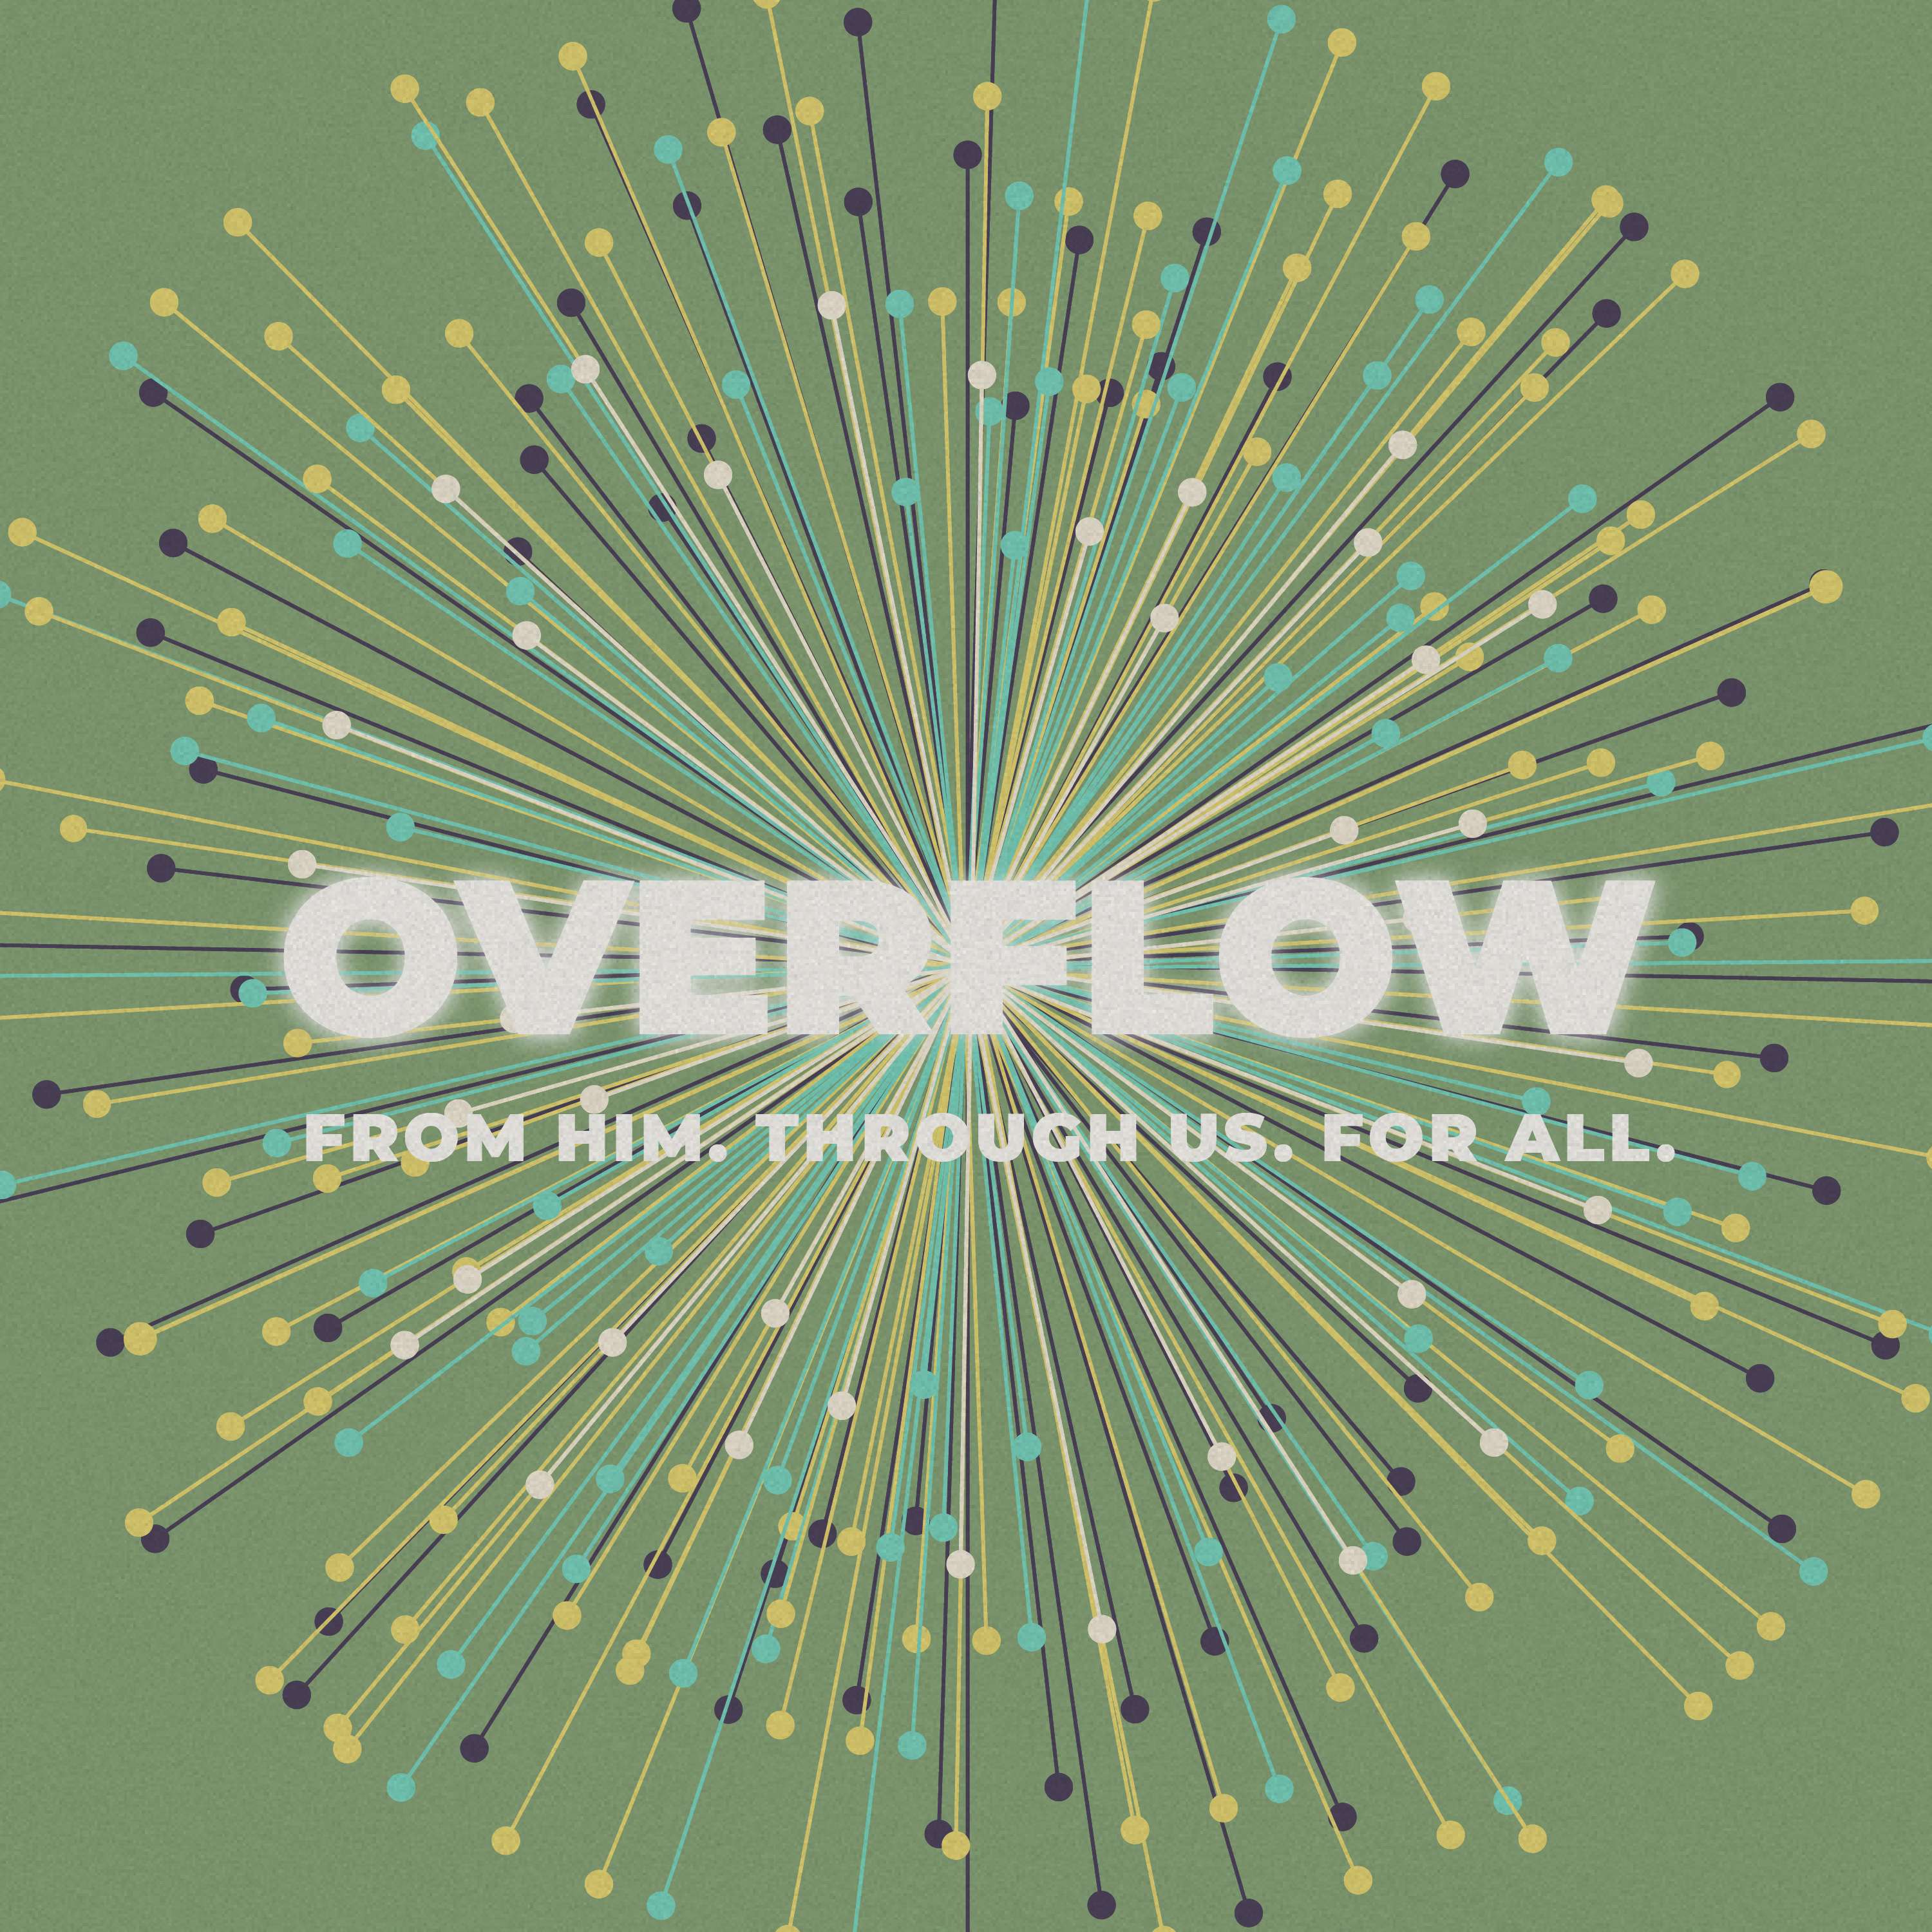 Overflow: From Him, Through Us, For All: Part 1 – Woodside Bible Church